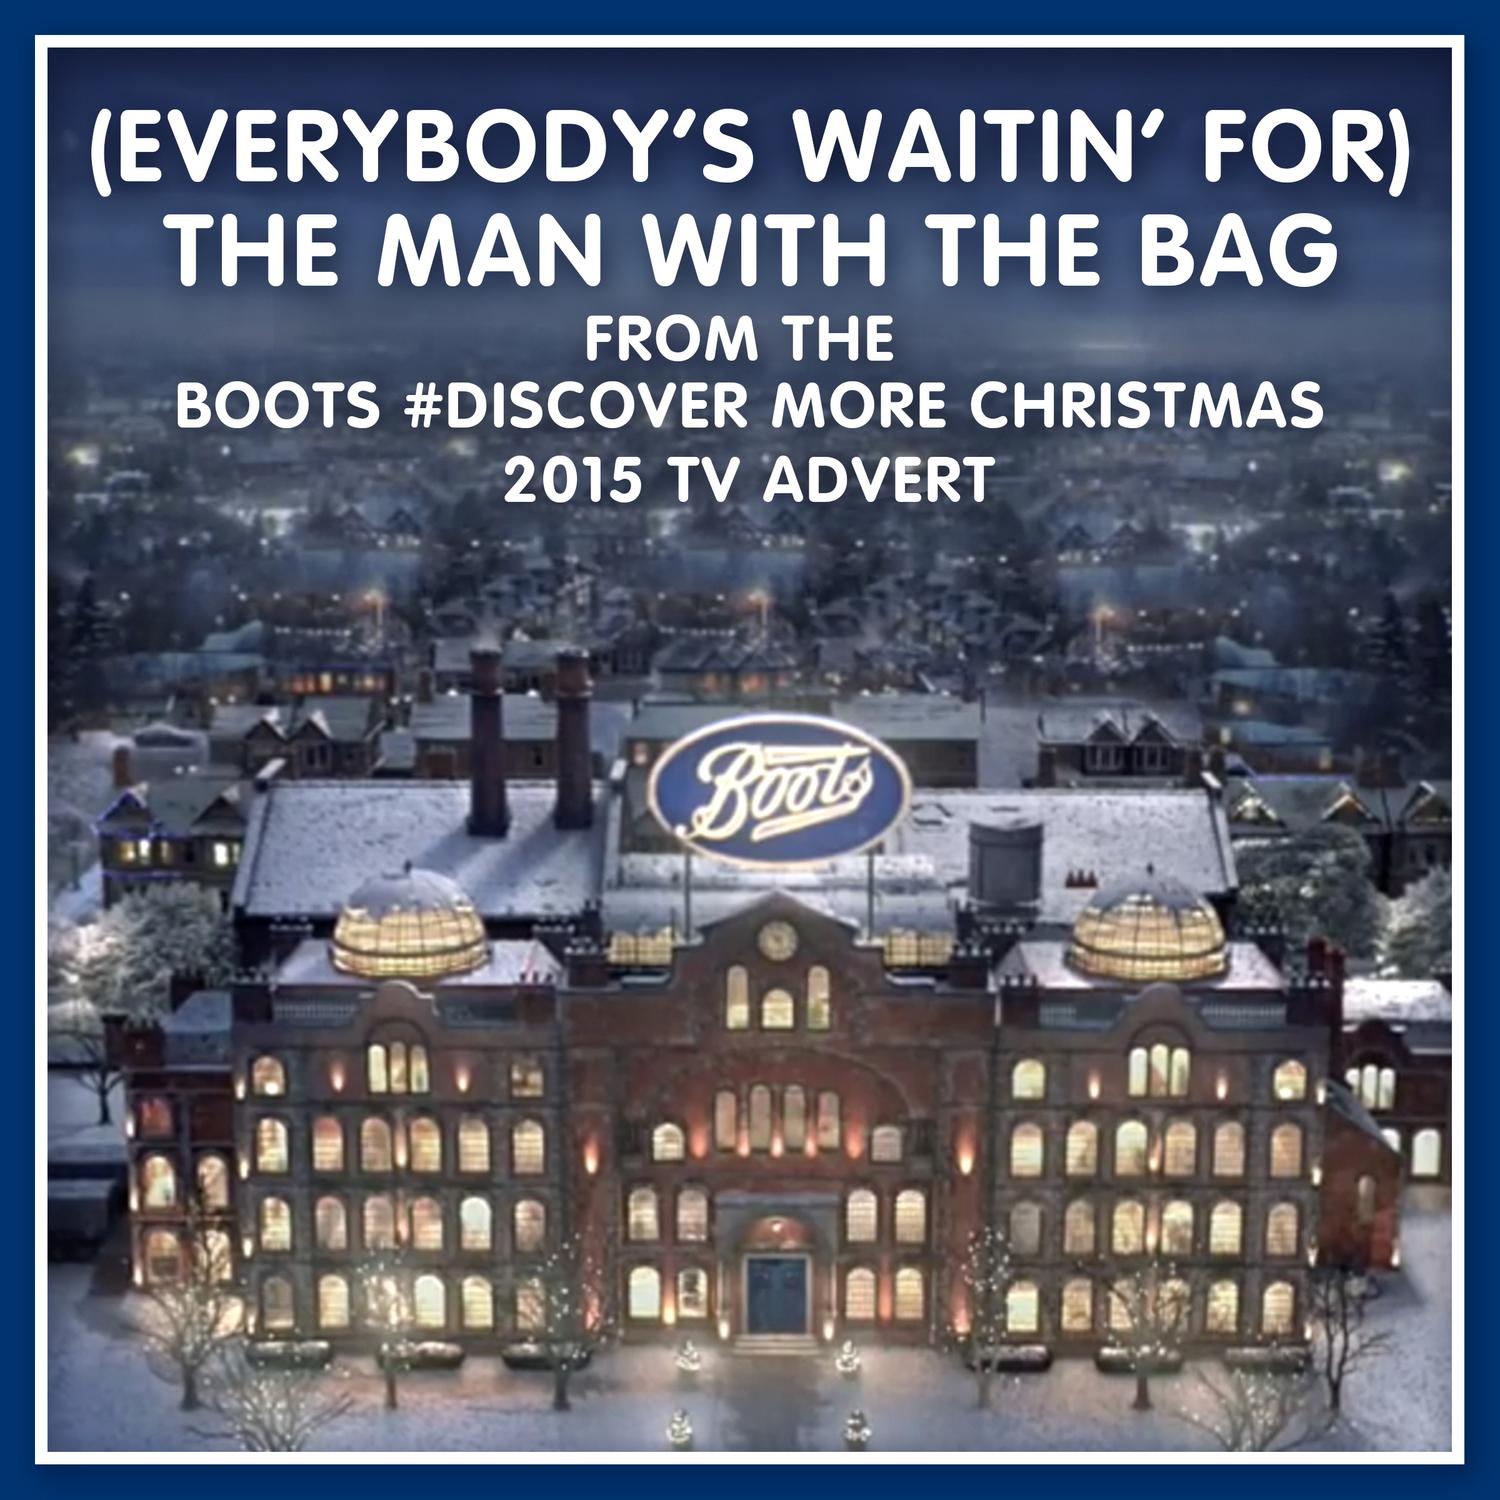 (Everybody's Waitin' For) The Man with the Bag (From The "Boots #discover More" Christmas 2015 Tv Advert)